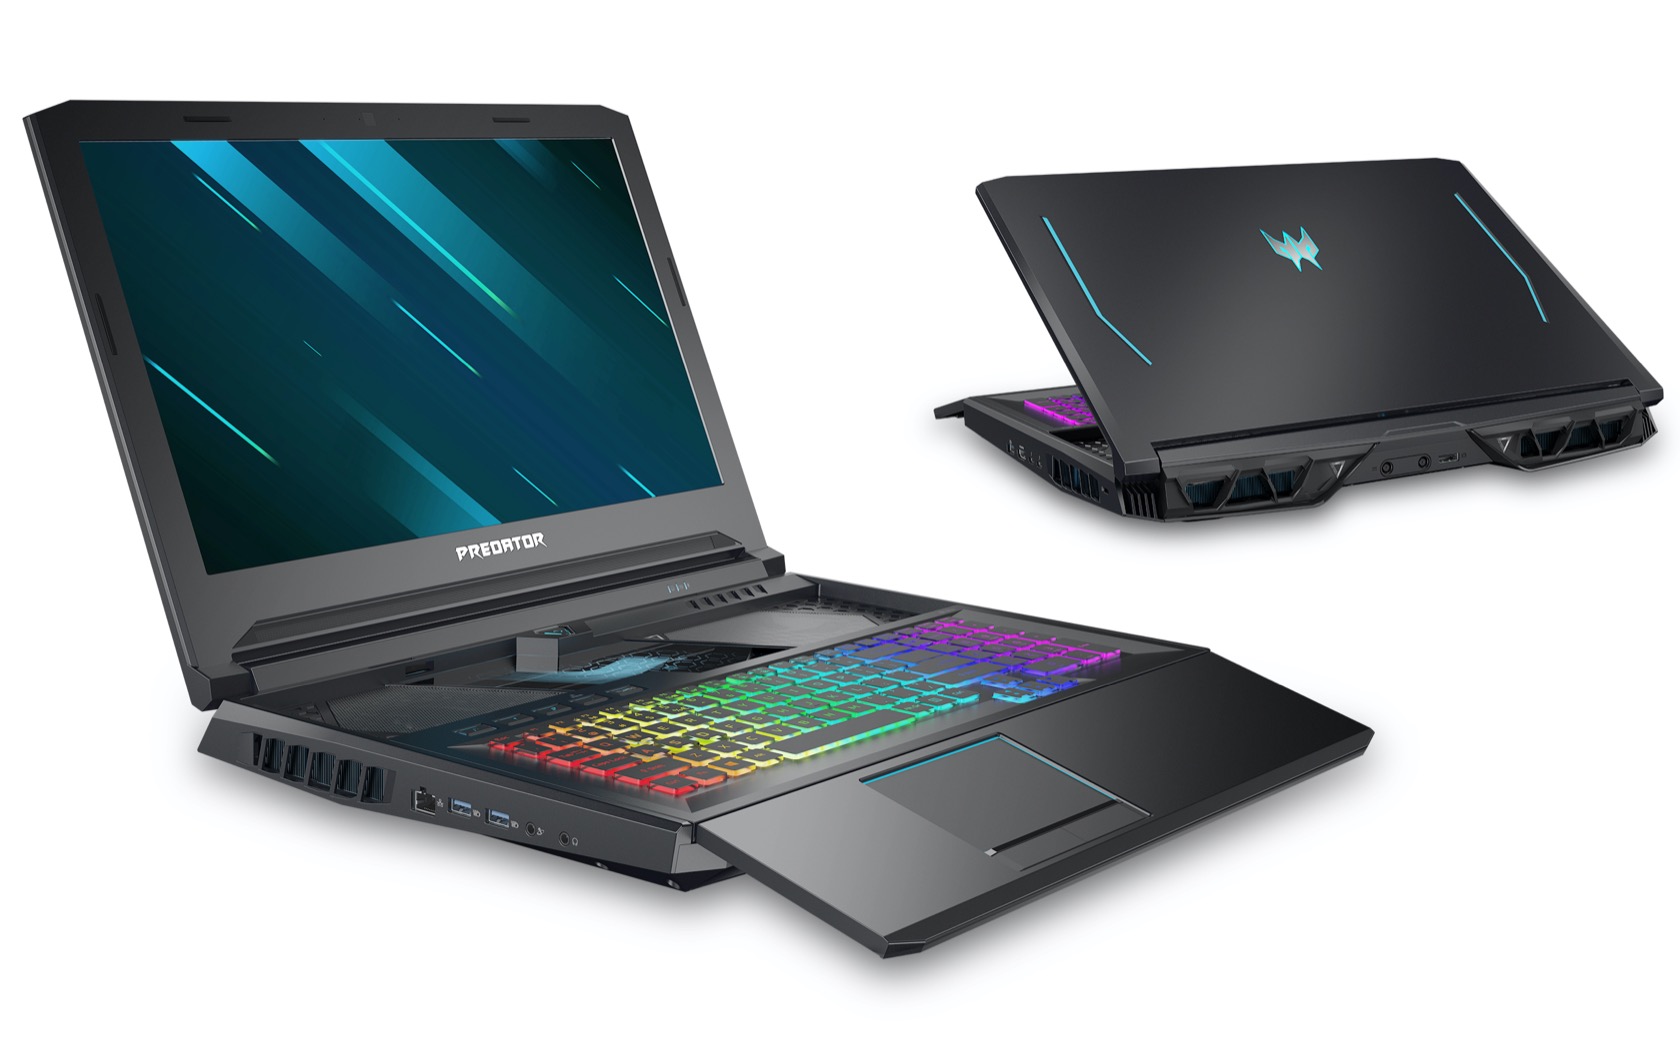 Acer Predator Helios Gives Gaming Laptops A Beastly Flagship